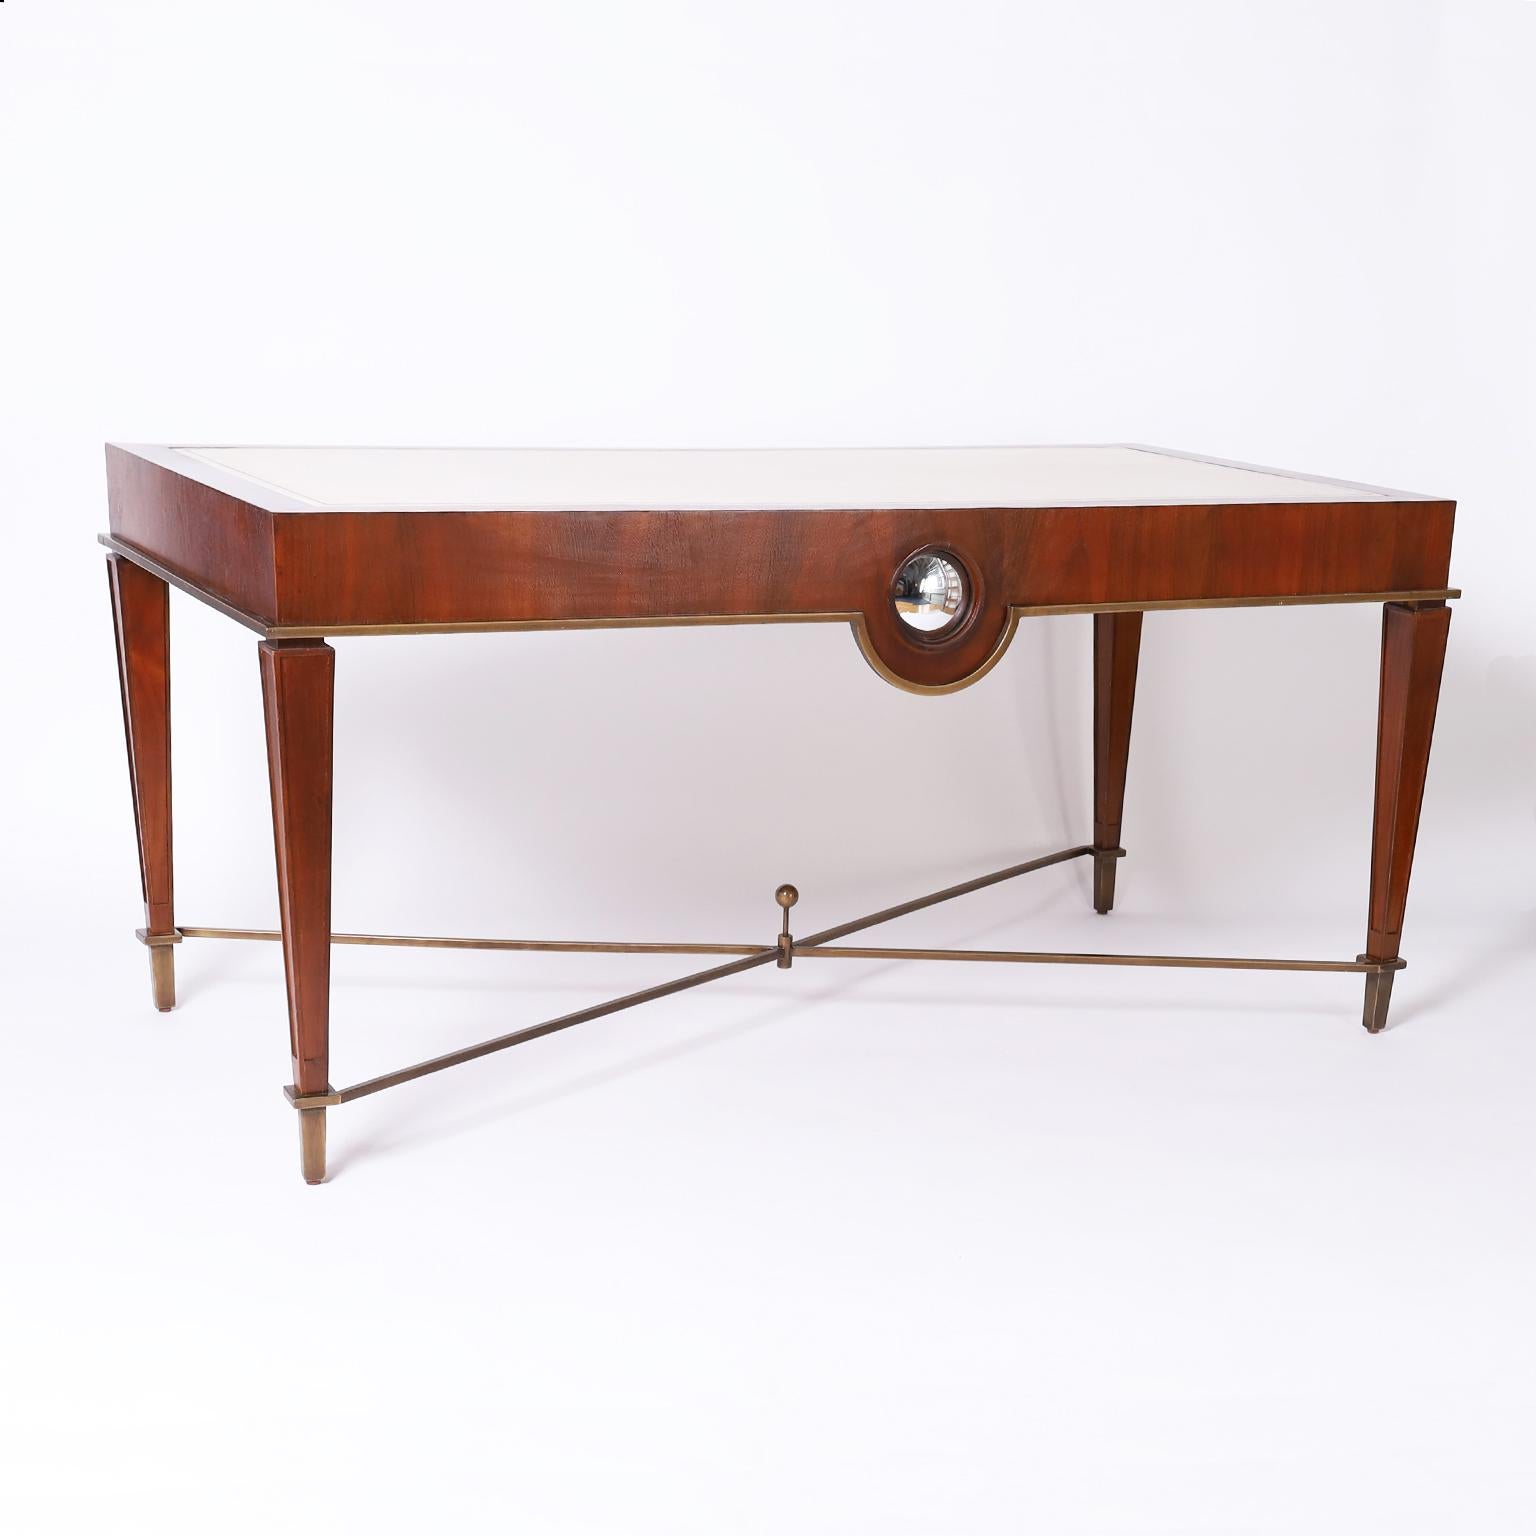 Three drawer desk or writing table crafted in mahogany with a white leather top over a sleek elegant form with art deco influence, finished all around with a convex mirror on the back and a bronze stretcher with center ball and attached feet.